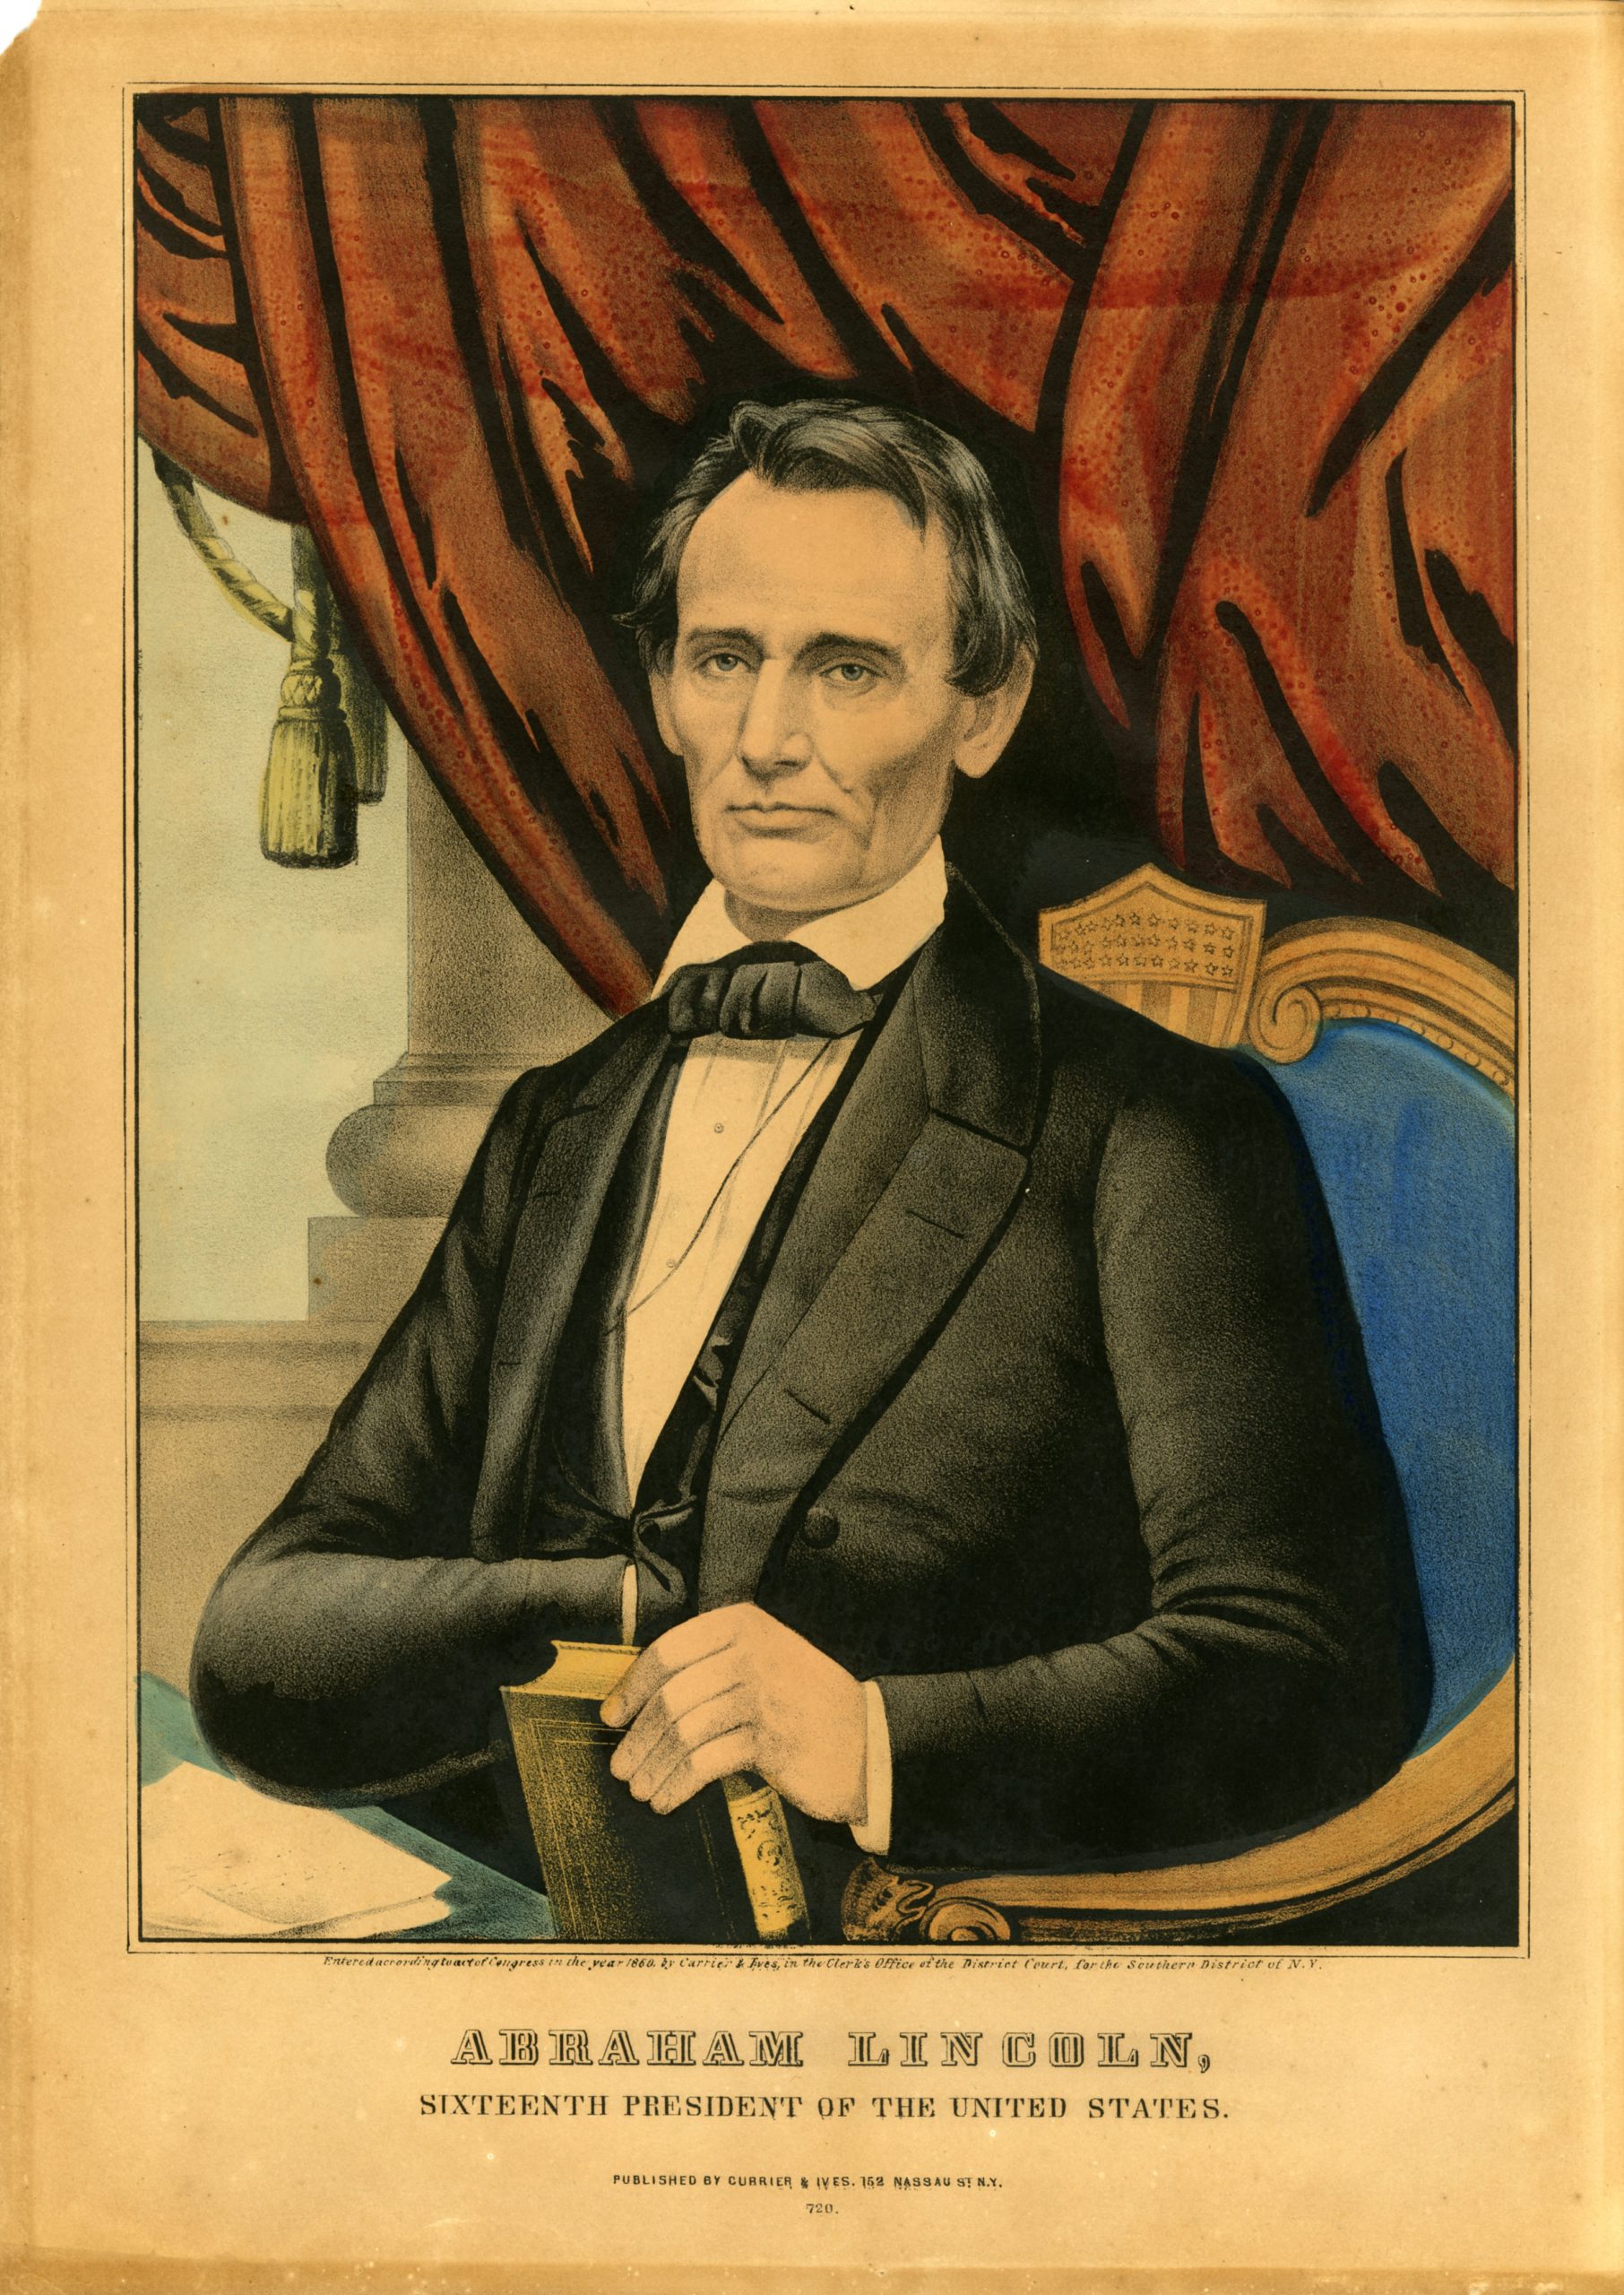 Abraham Lincoln, Sixteenth President of the United States, 1860, Currier and Ives, lithograph 14.24 x 10 inches (Chicago Public Library)